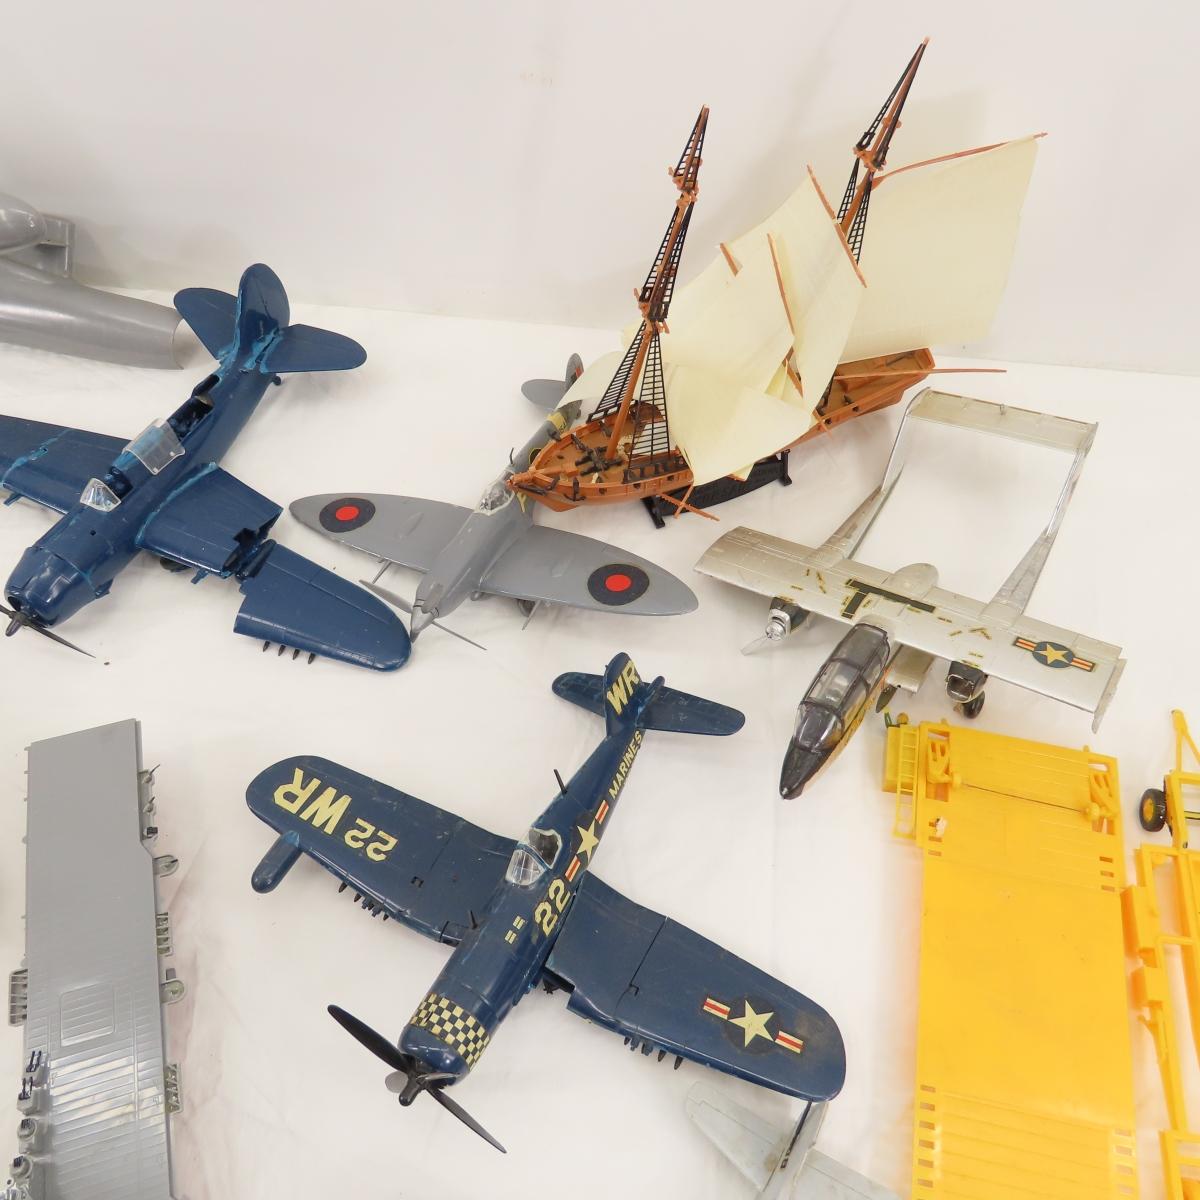 Vintage Boat and Plane Models- as shown